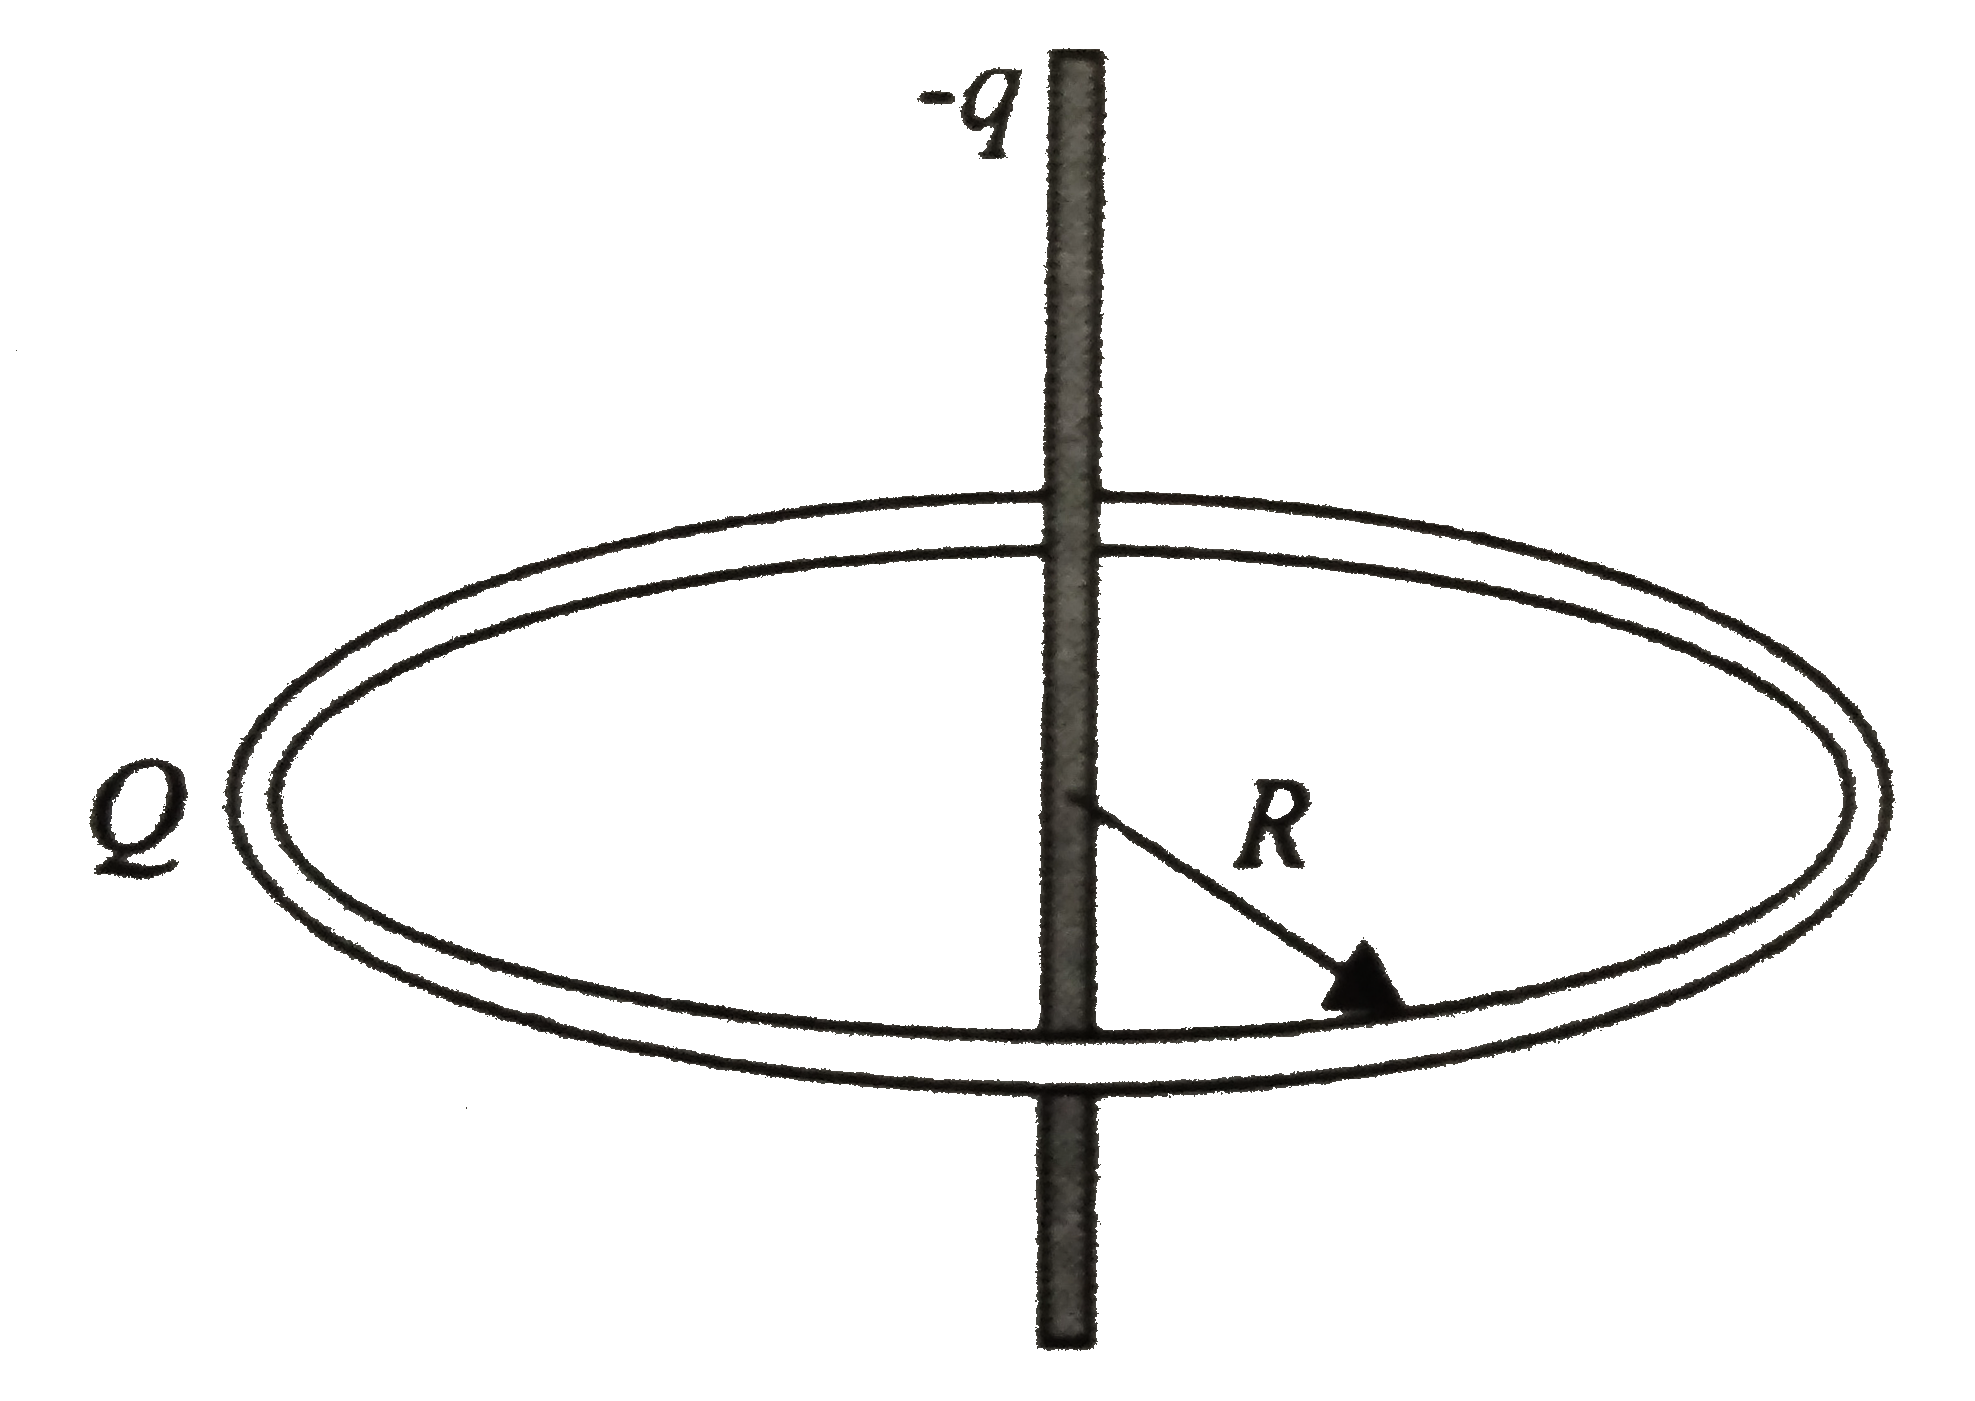 In a free space, a thin rod carrying uniformly distributed negative charge -q is placed symmetrically along the axis of a tin ring of radius R varrying uniformly dostributed charge Q. The mass of the rod is m and length is l=2R. The ring is fixed and the rod is free to move. The rod is displaced slightly along the axis of the ring and then released. Find the period T to the small amplitude oscillations of the rod.